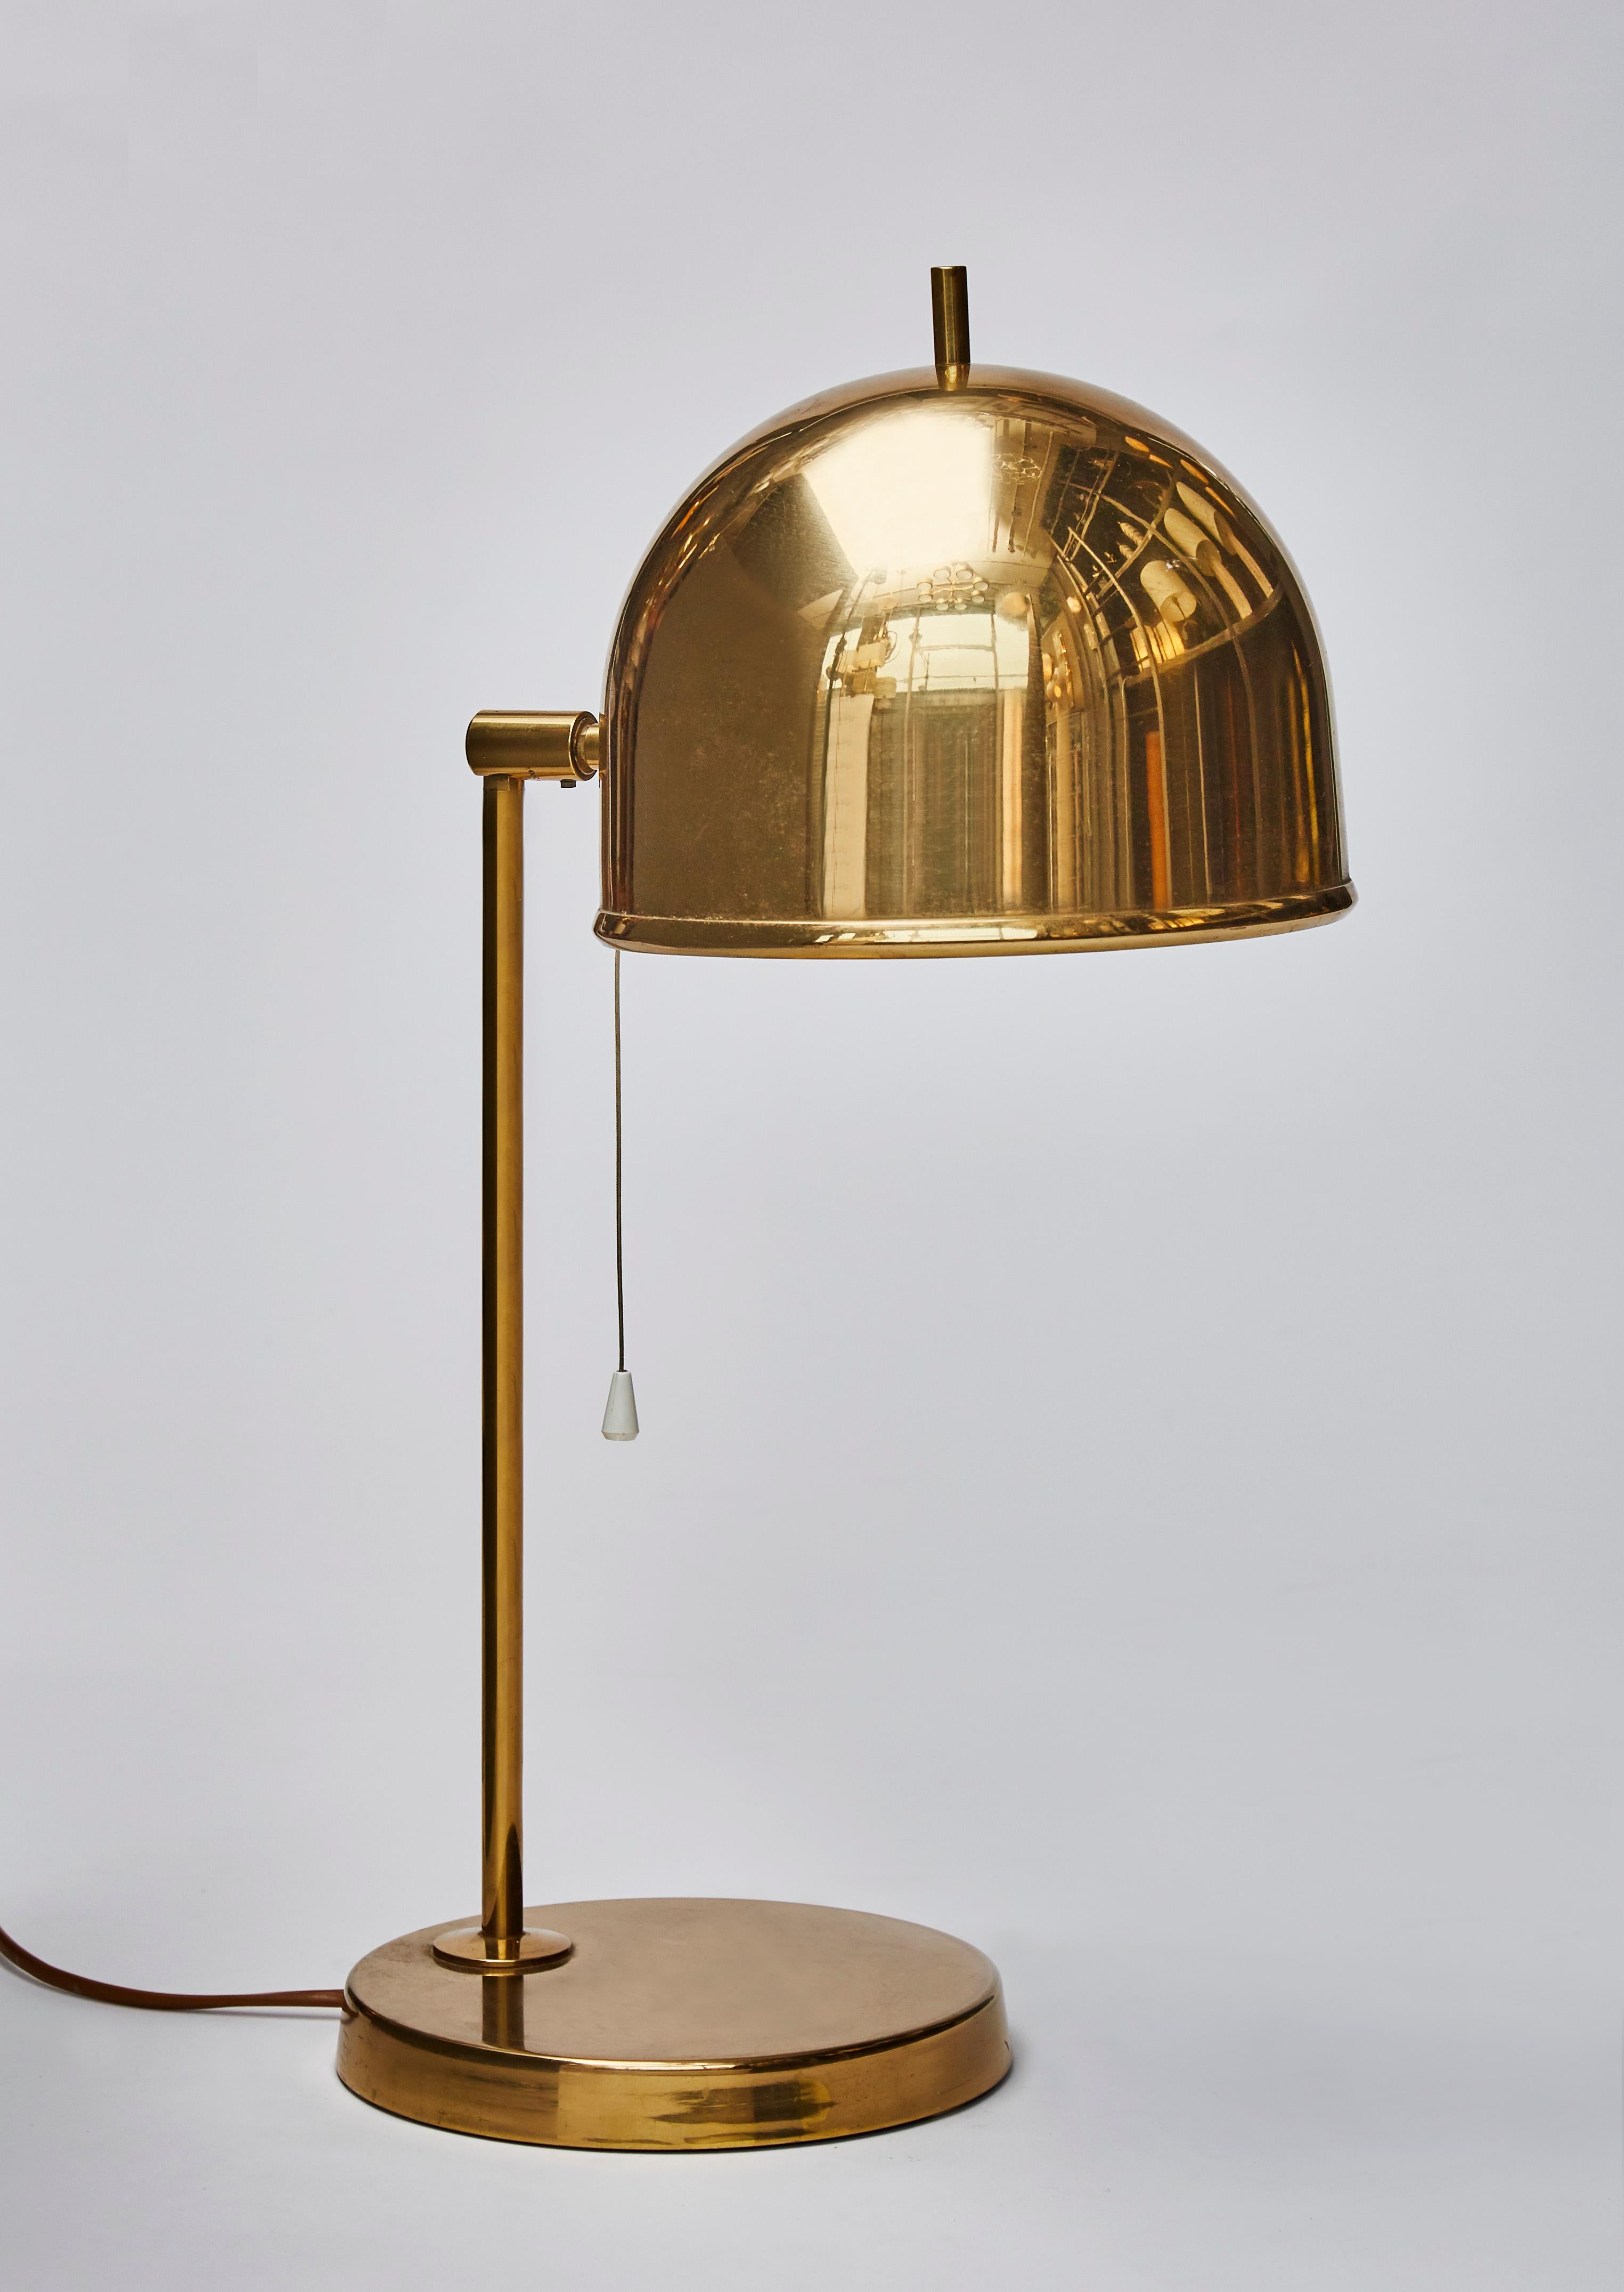 Pair of adjustable table lamps in brass model B-075 by Eje Ahlgren for Bergboms.

Original stickers at the bottom.
 